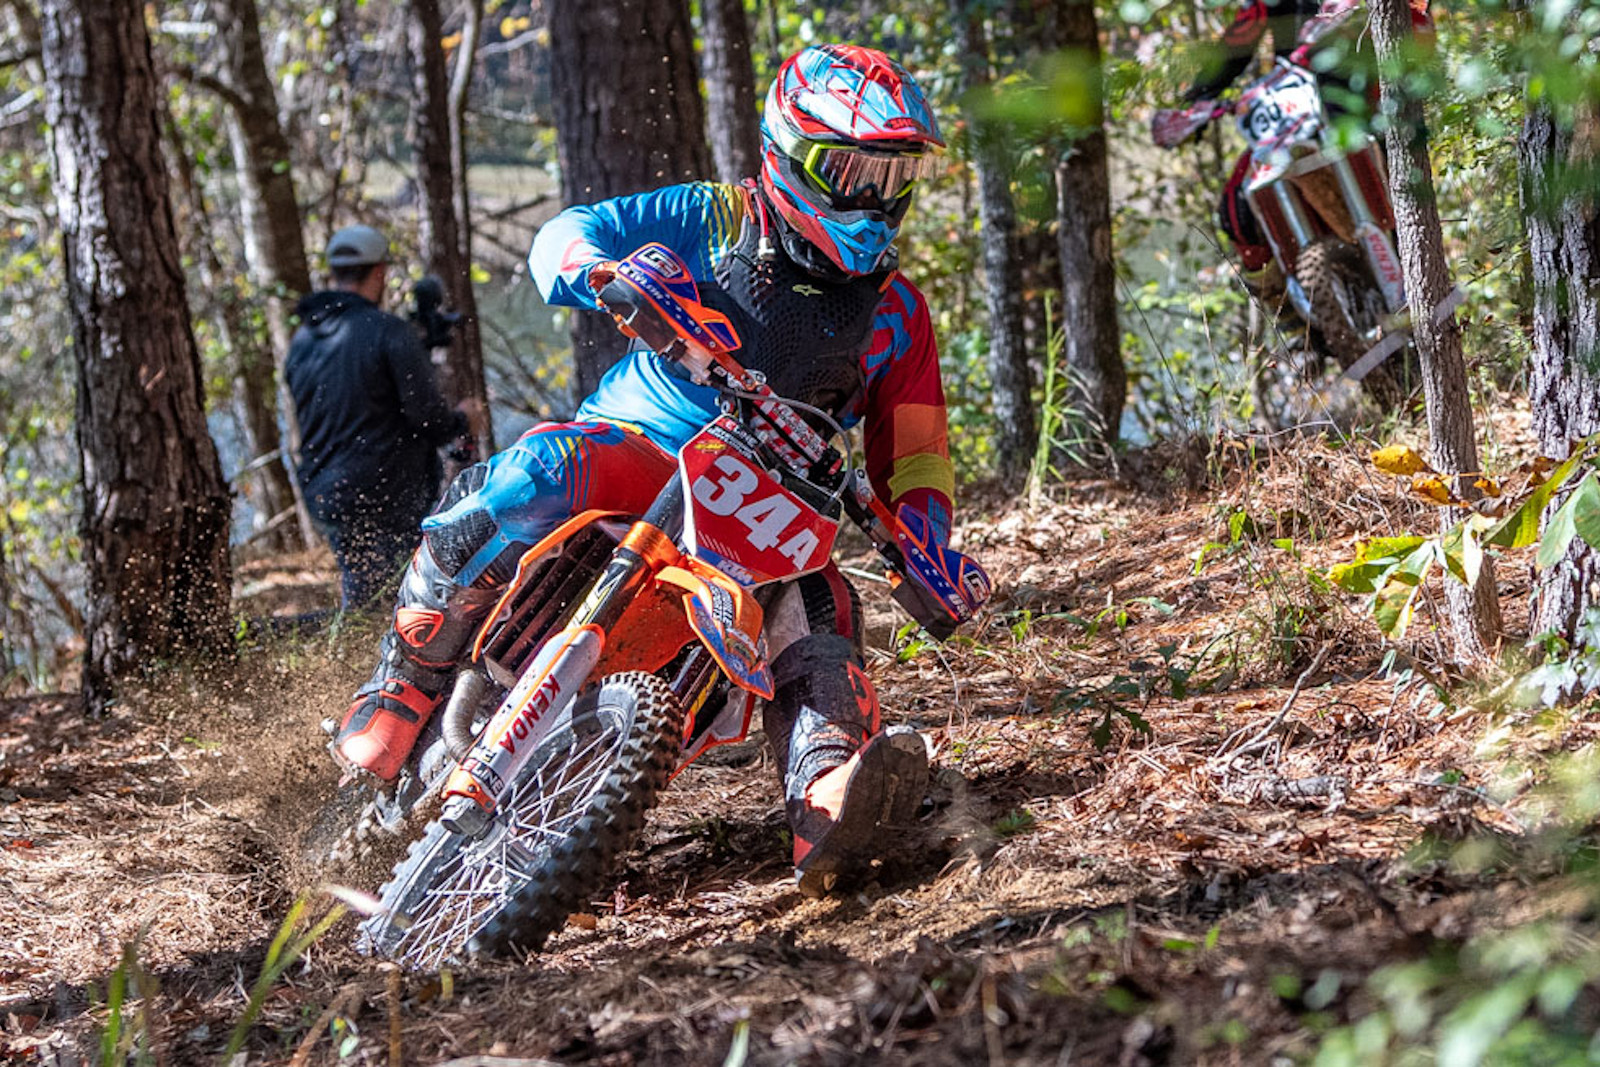 Results: Steward Baylor Clinches 2019 AMA National Enduro title